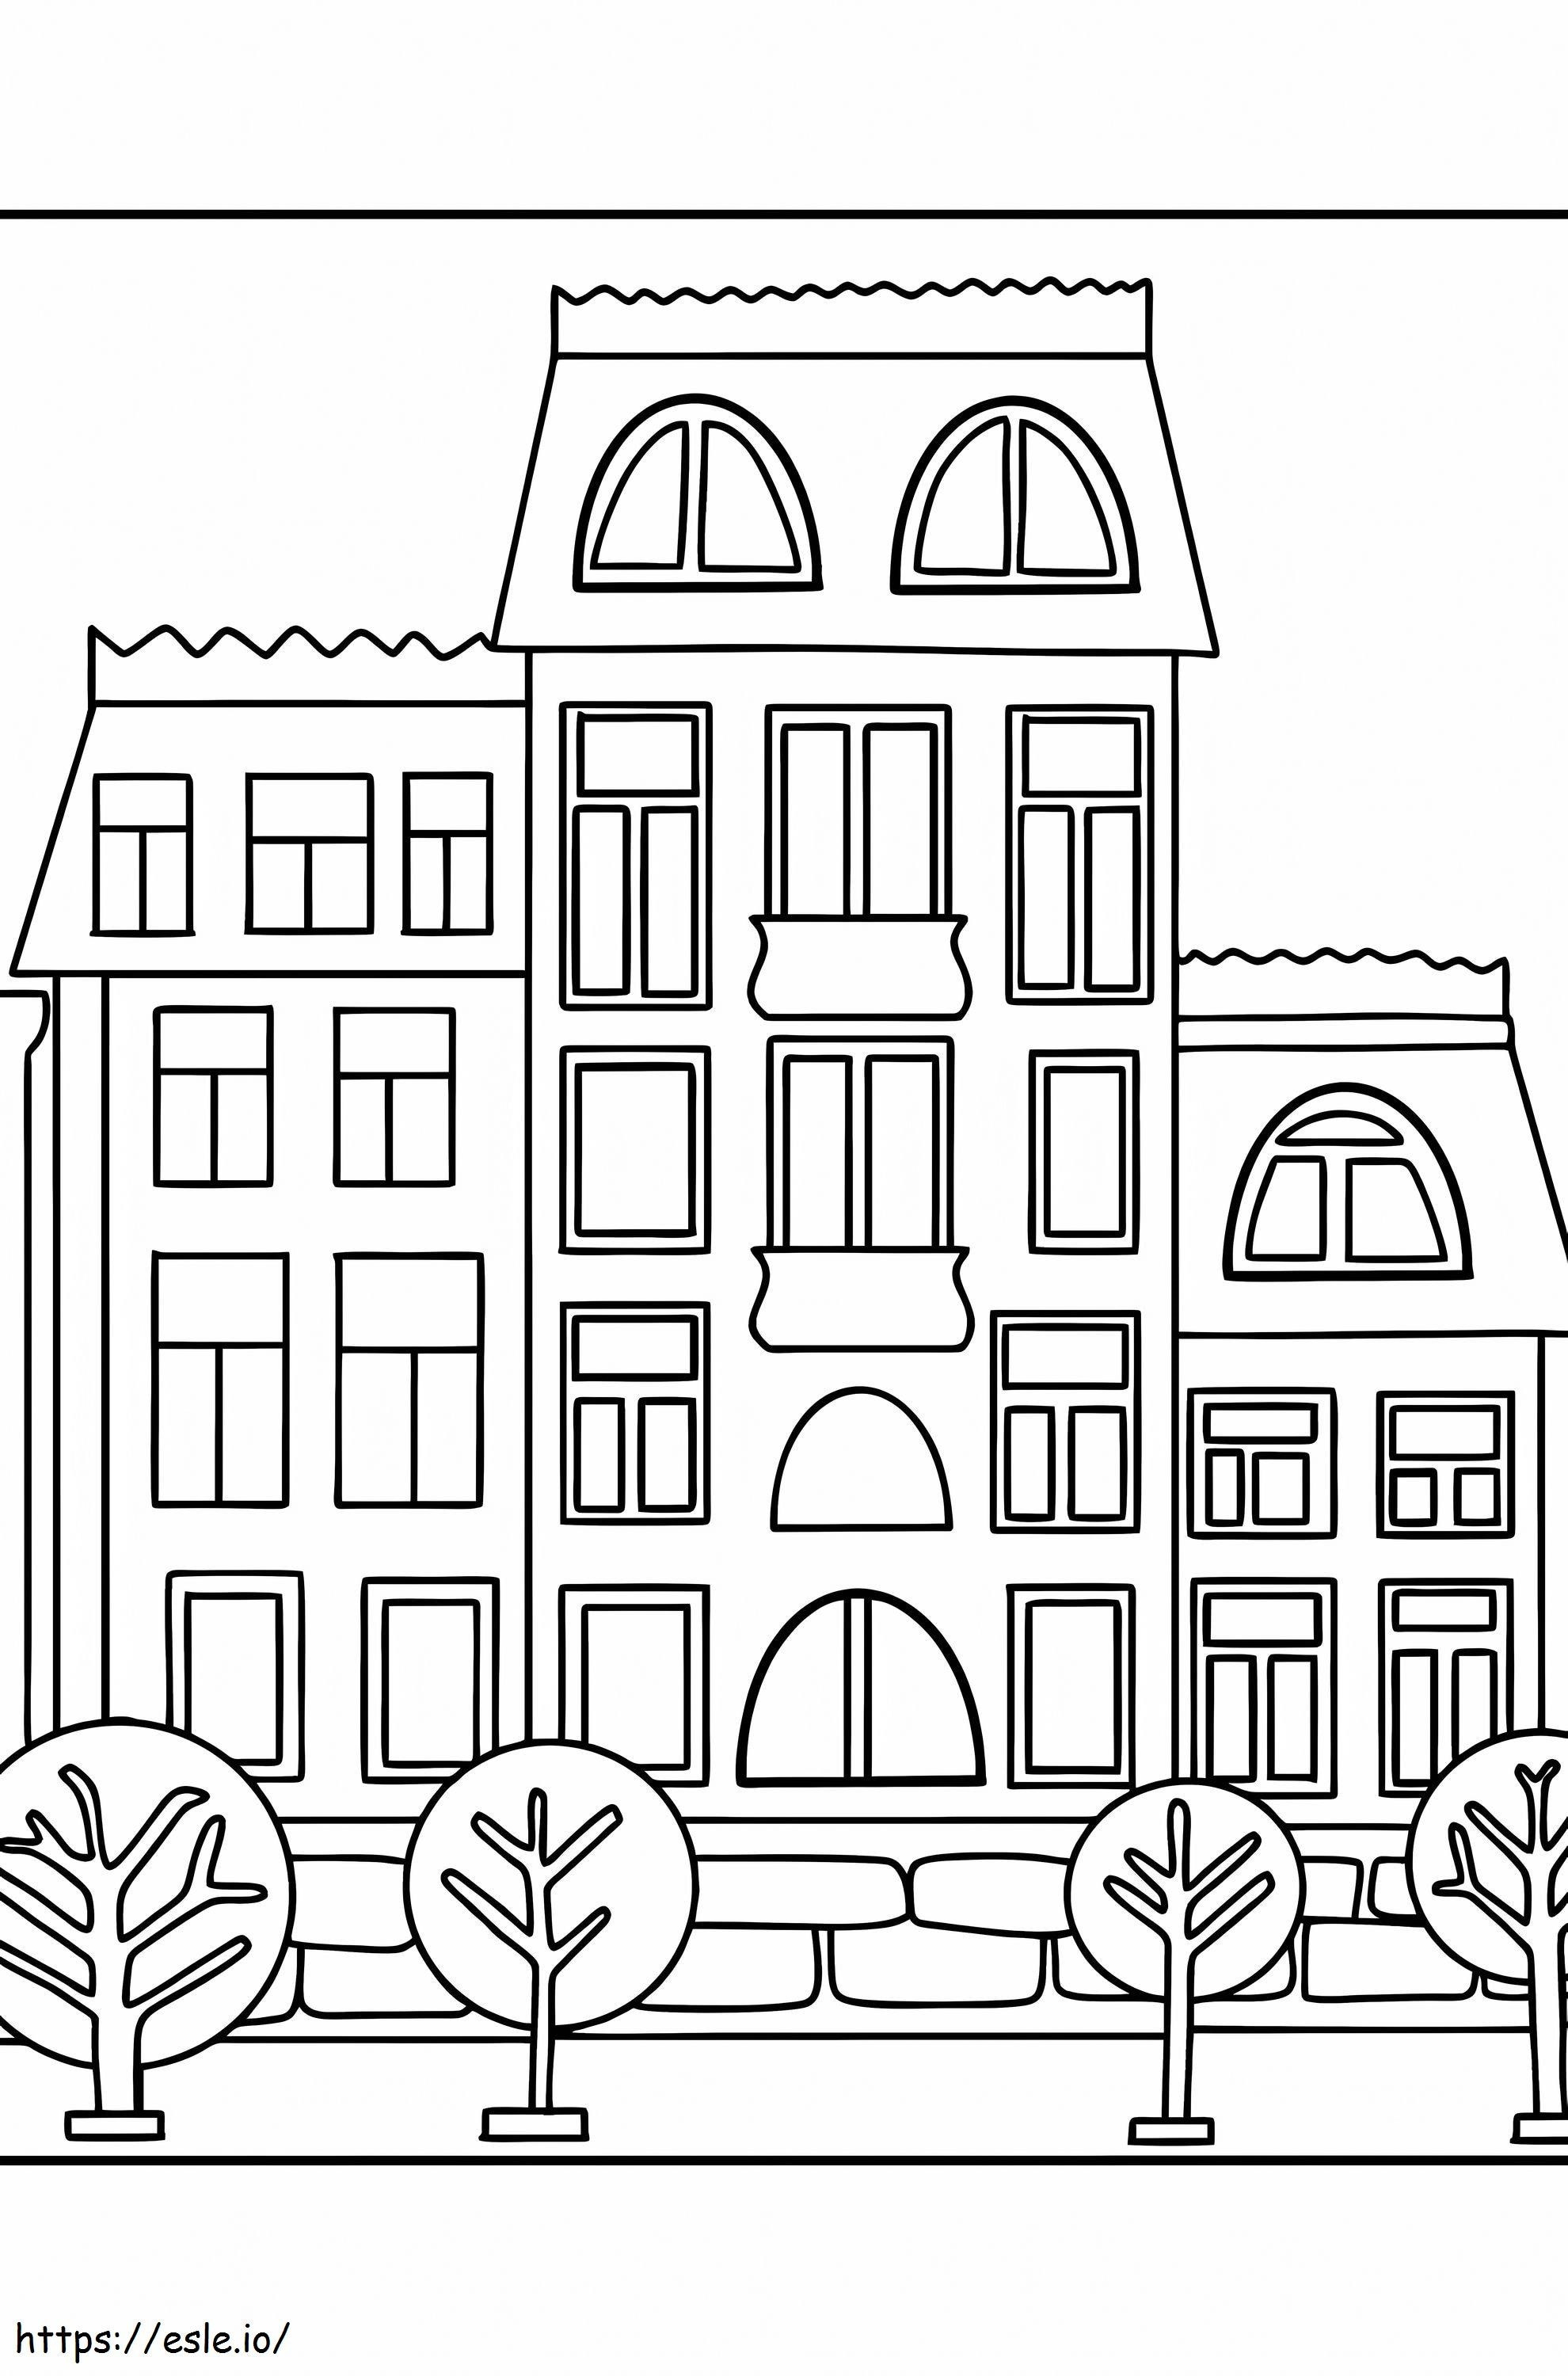 Construction Of Normal Houses coloring page